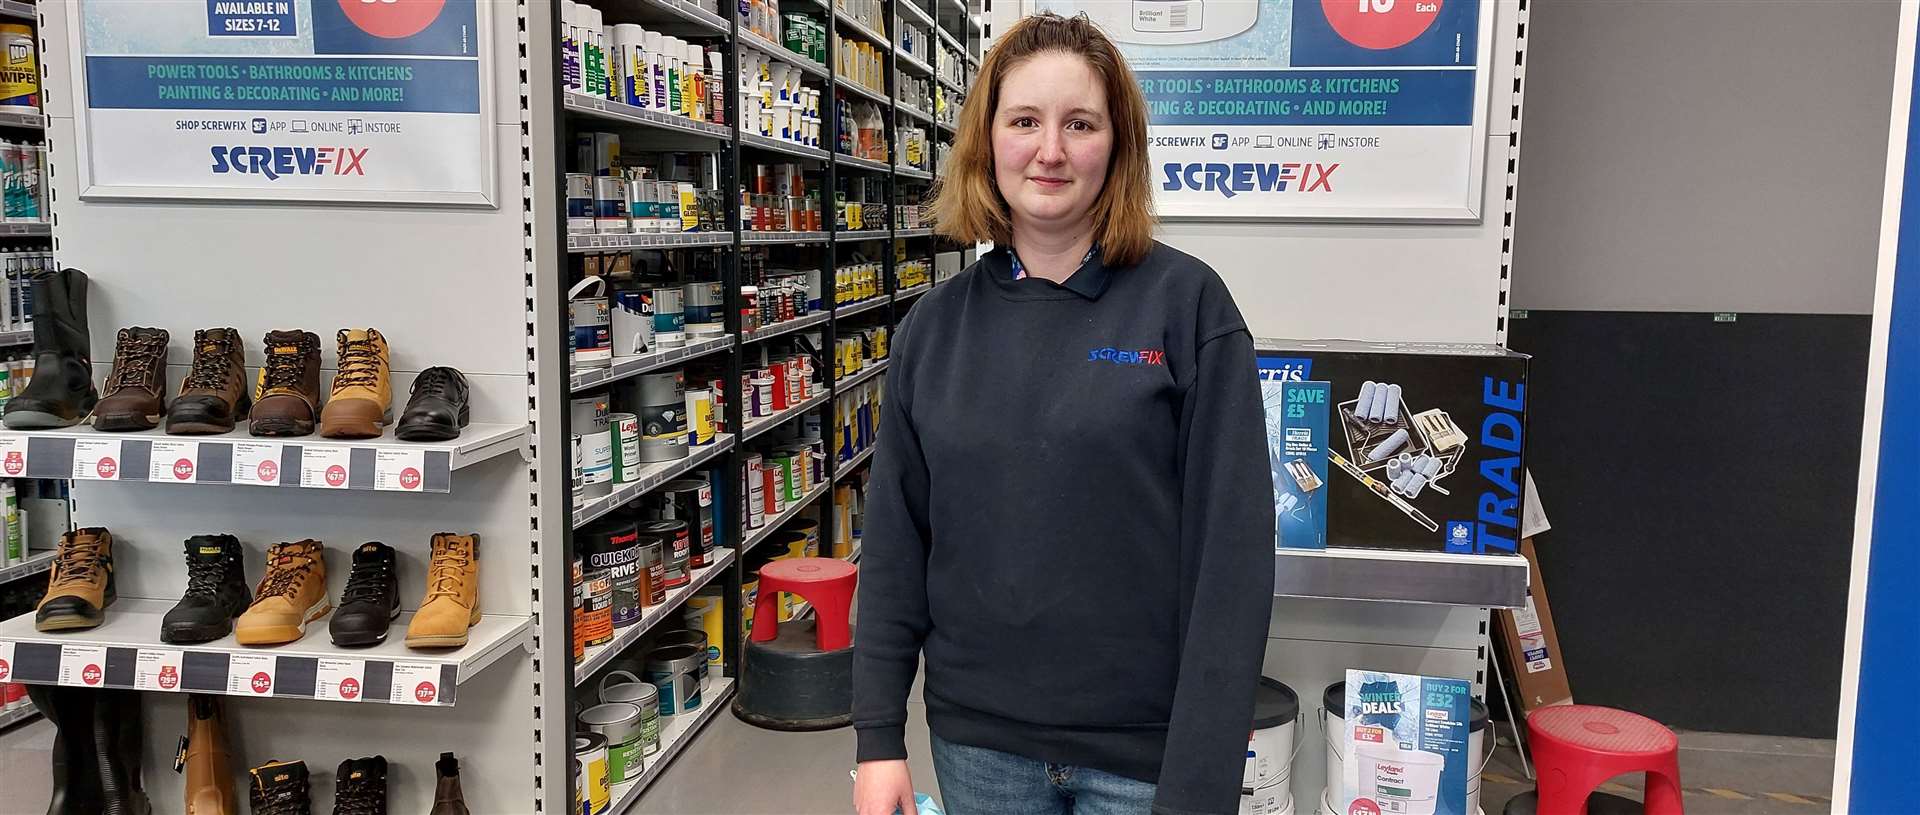 Screwfix assistant manager Jessica Smith